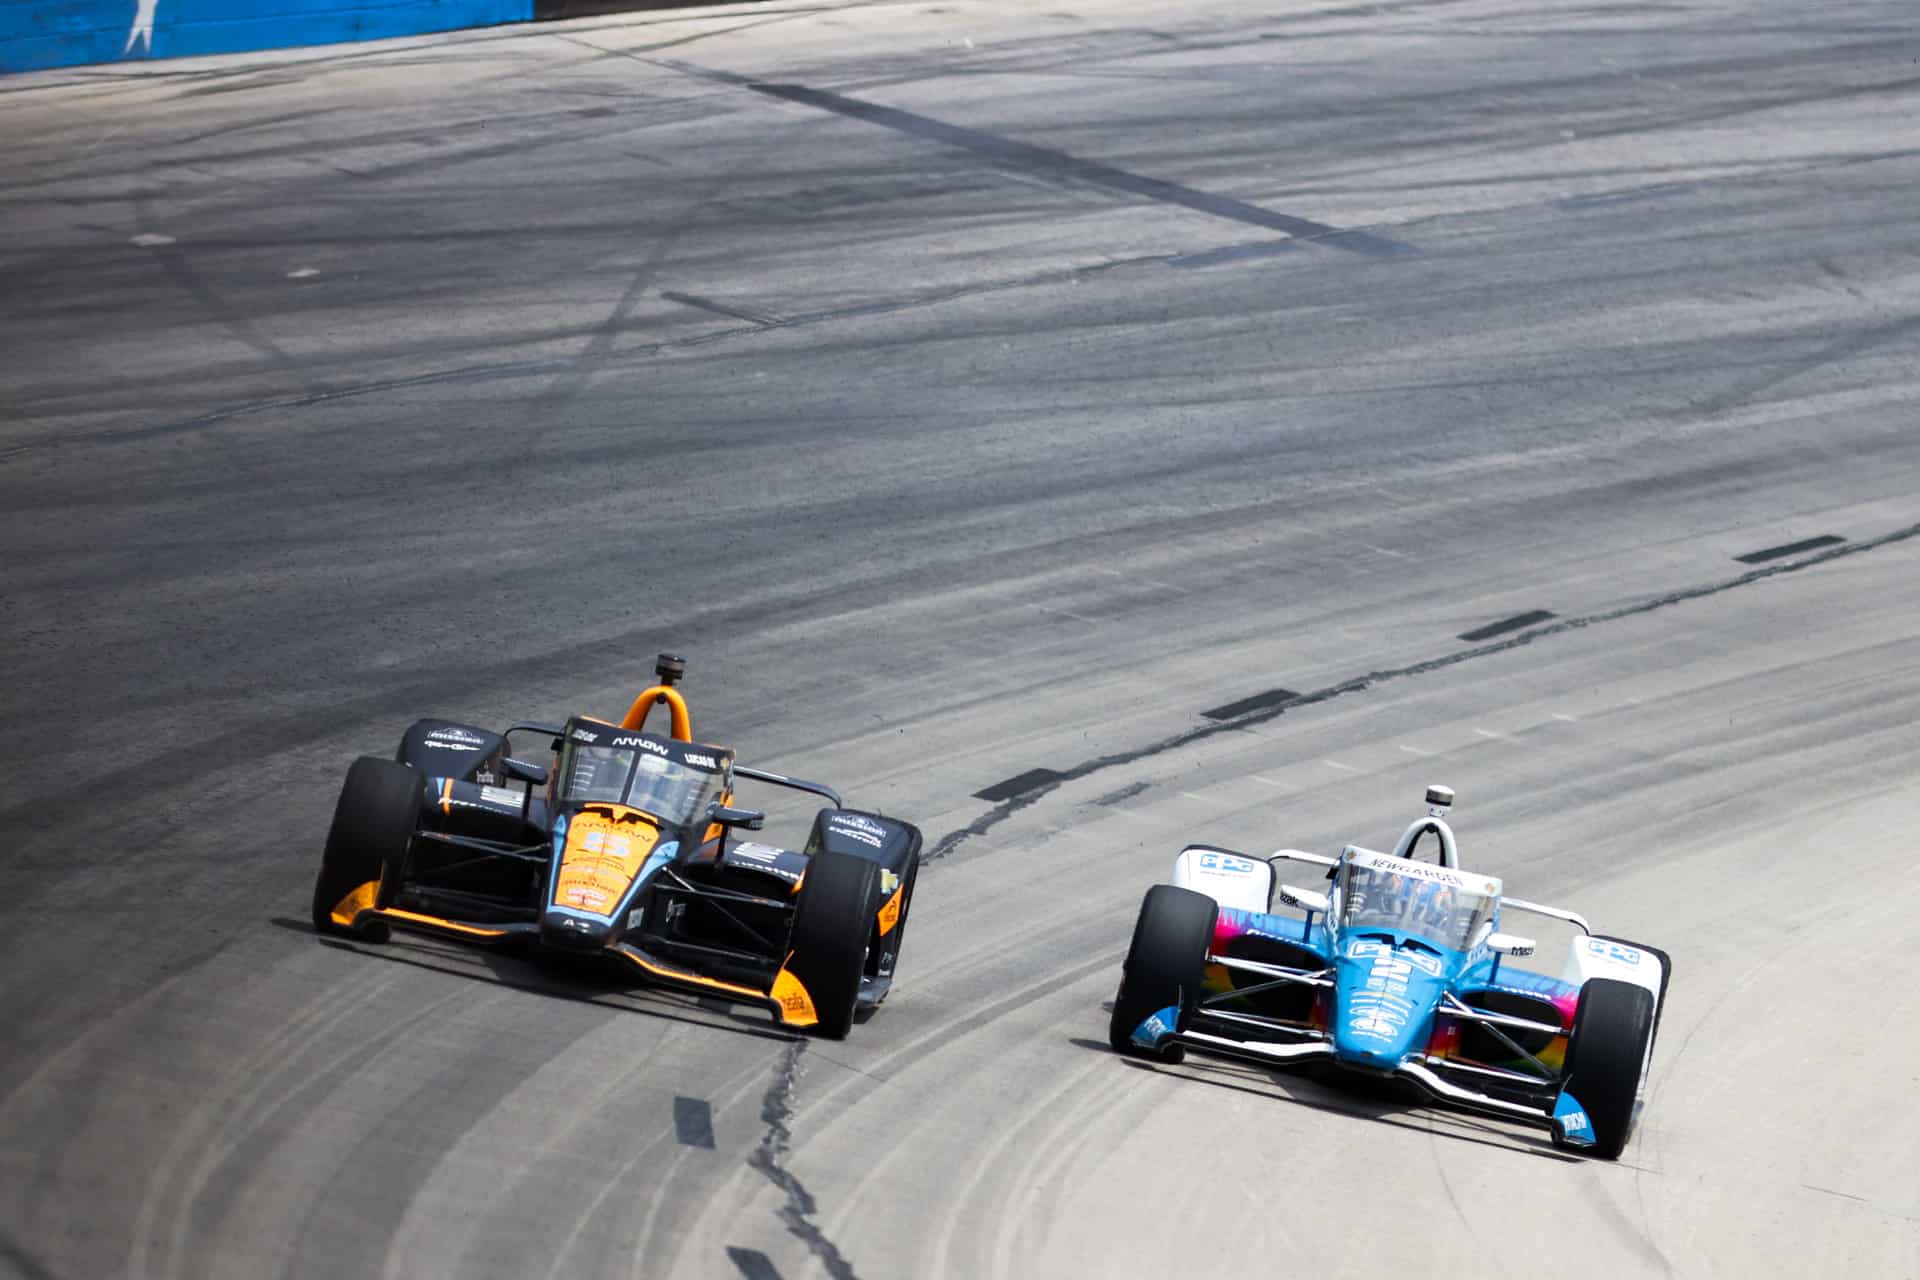 Pato O'Ward finished second at Texas Motor Speedway in the 2023 PPG 375 for Arrow McLaren IndyCar Team in the NTT IndyCar Series. Photo by Rachel Schuoler.